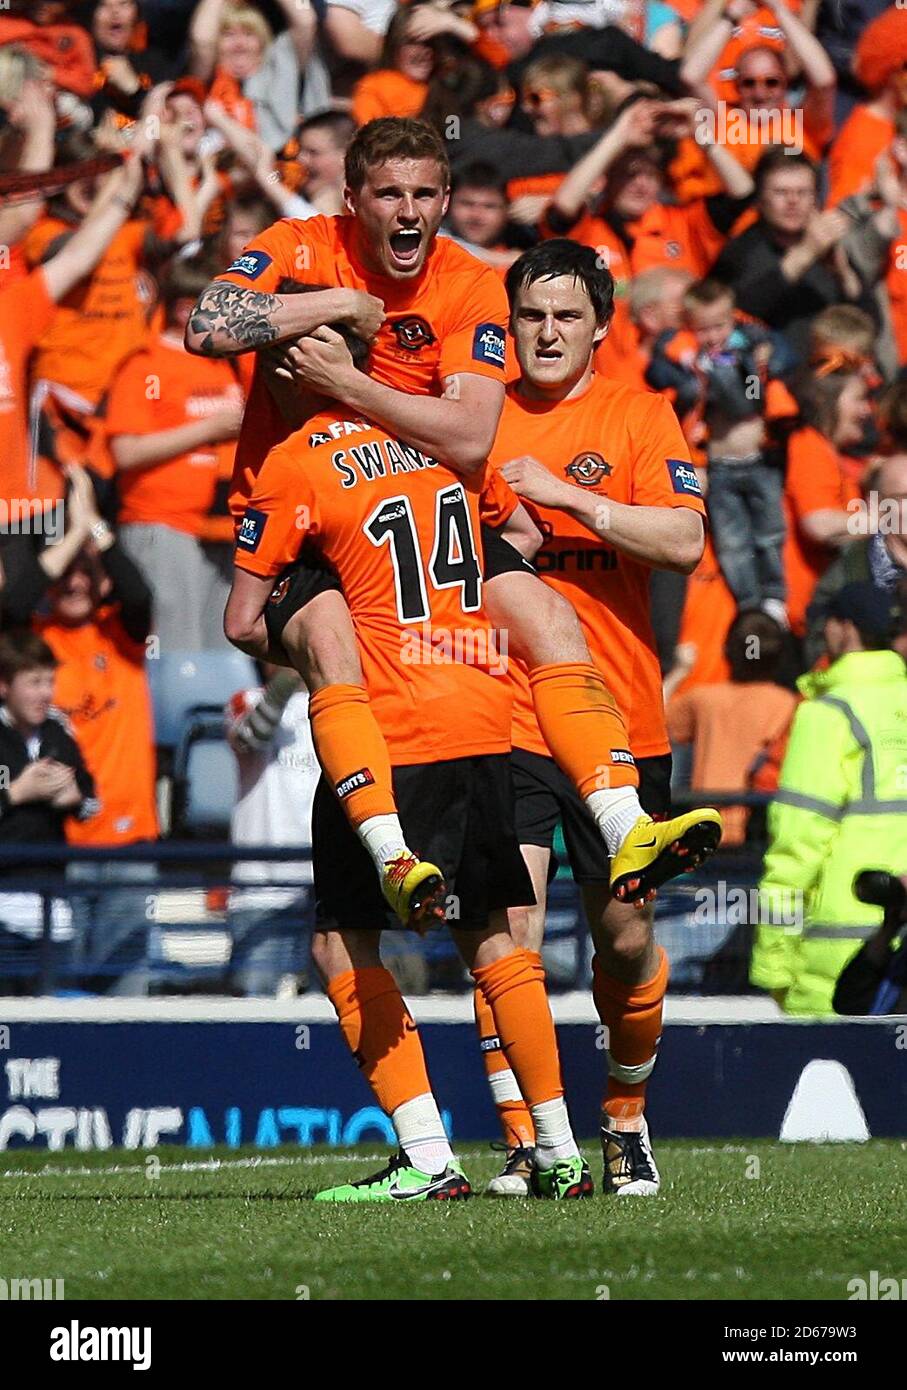 Dundee United's David Goodwillie celebrates with team mate Daniel Swanson (14) after he scores their sides first goal of the game Stock Photo